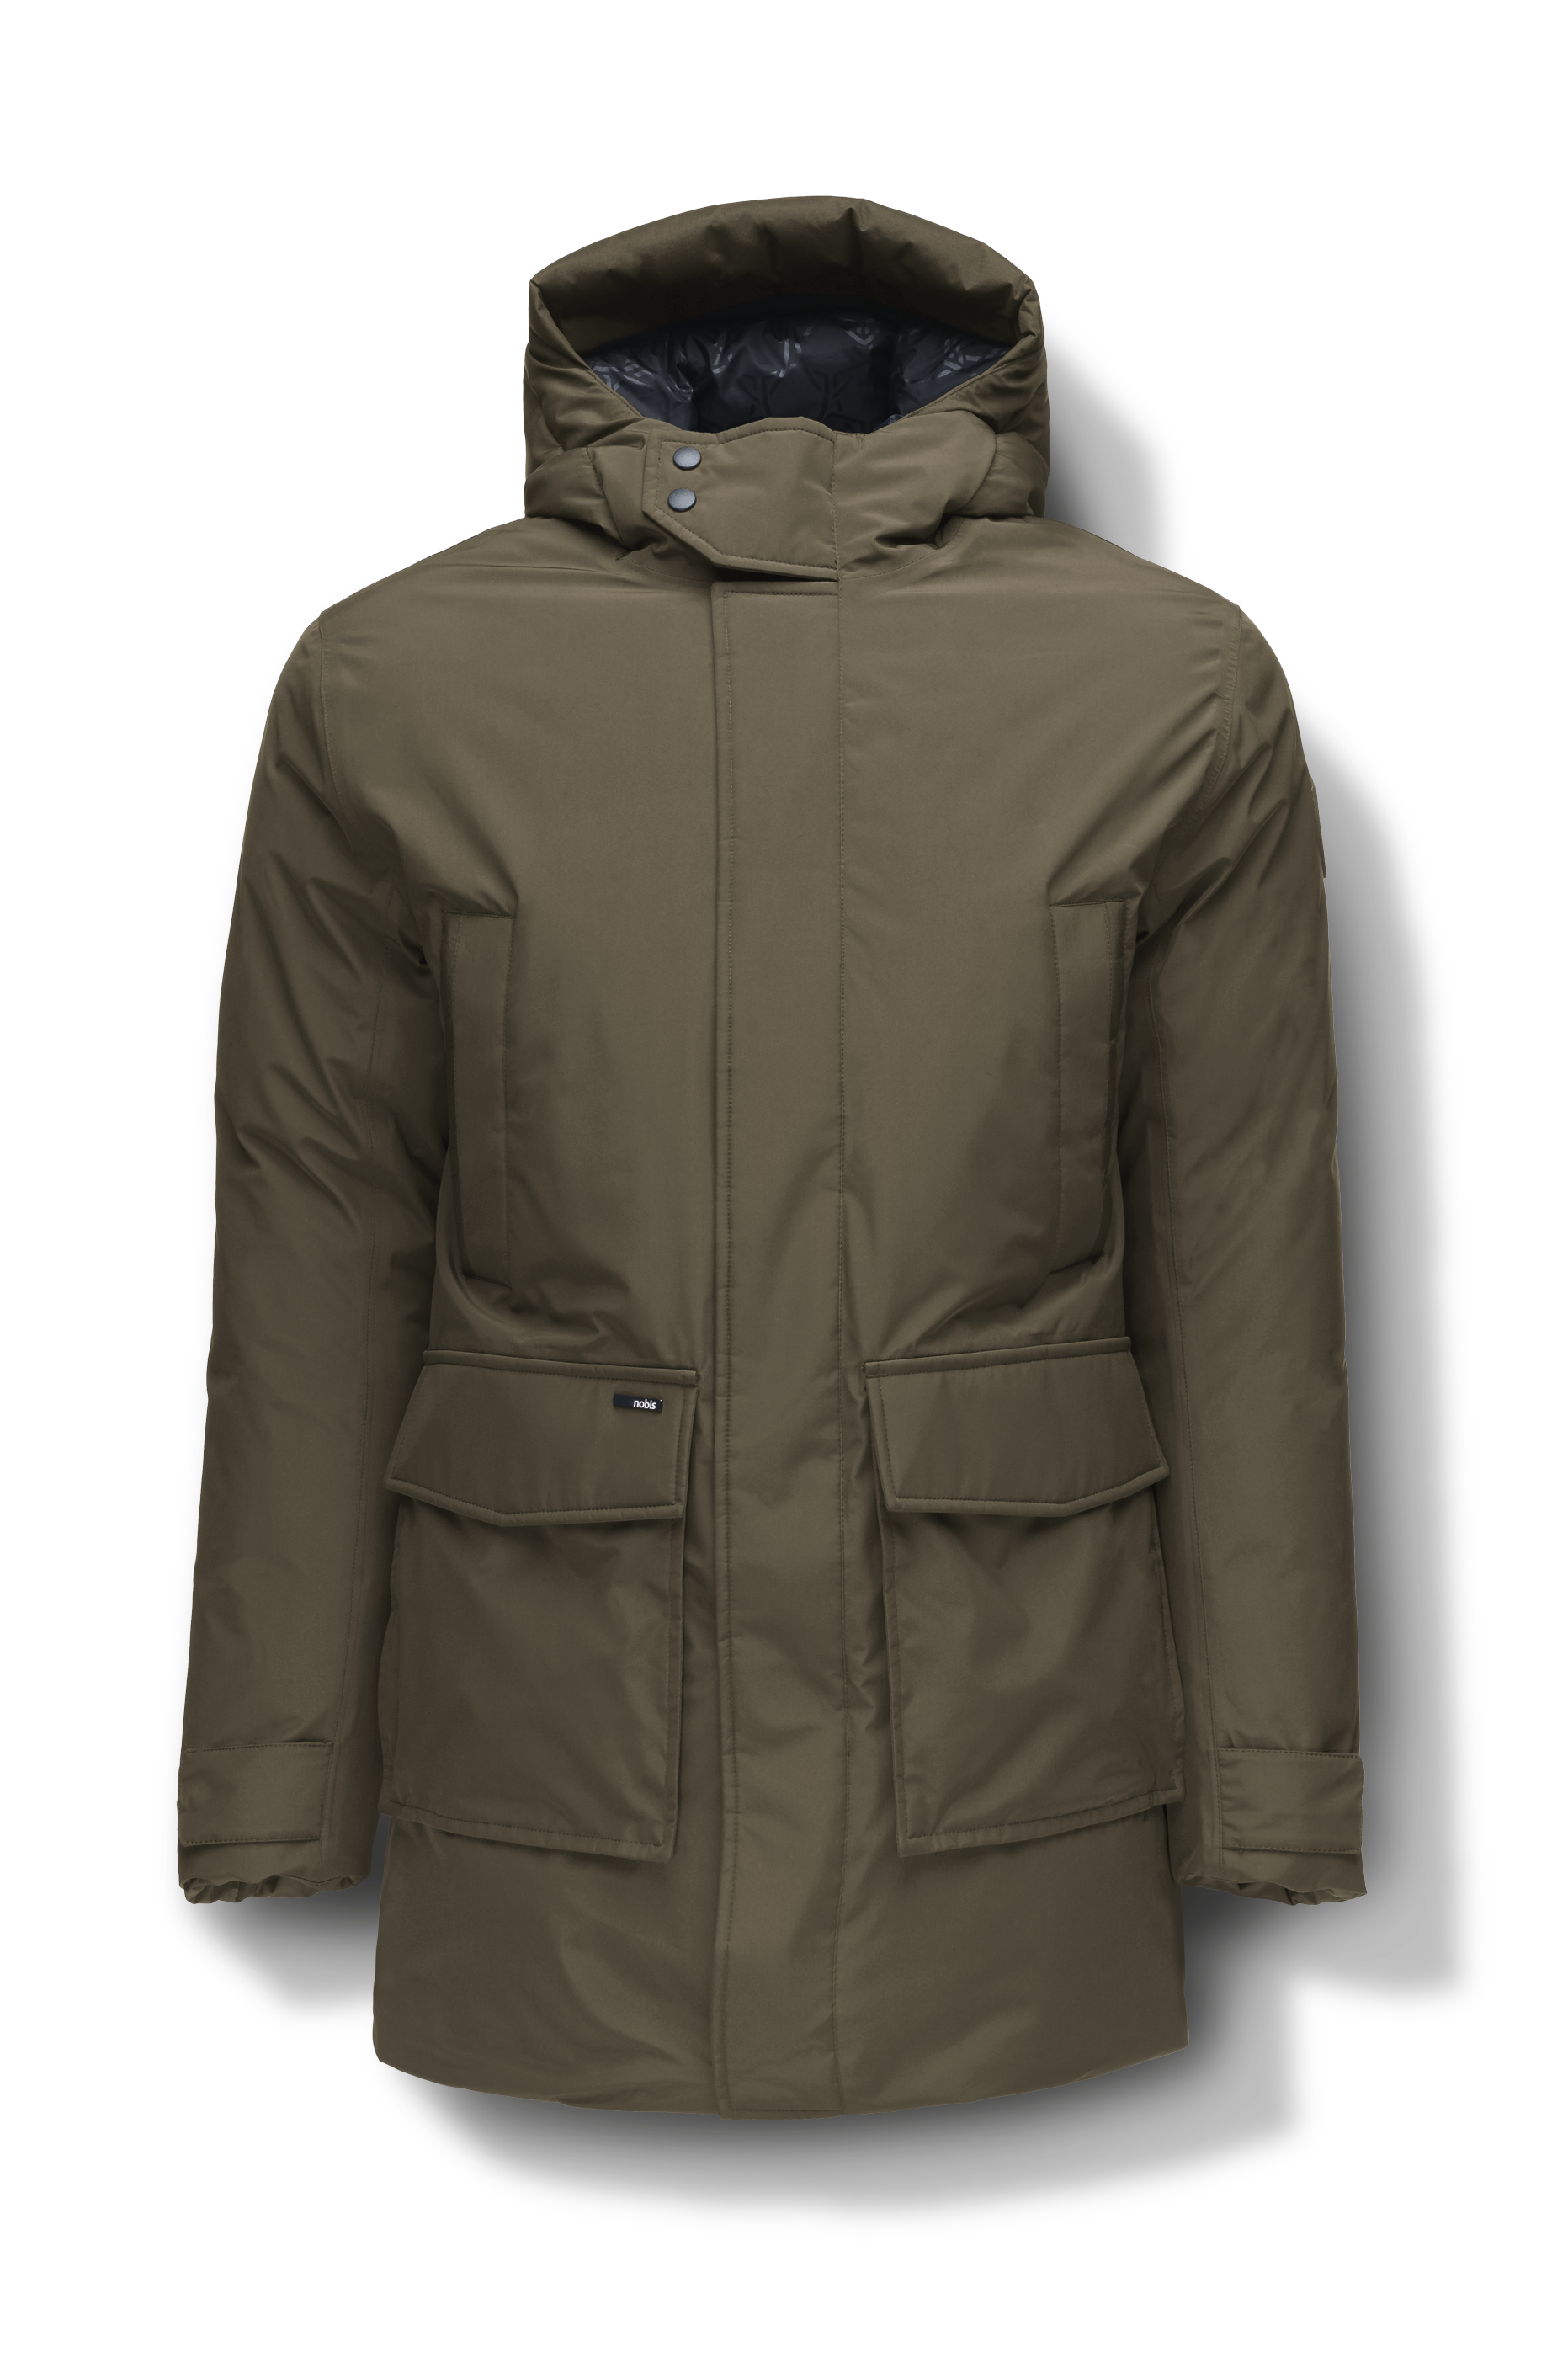 Kason Men's Light Down Parka in thigh length, premium 3-ply micro denier and stretch ripstop fabrication, Premium Canadian origin White Duck Down insulation, non-removable down-filled hood, two-way centre-front zipper, magnetic closure wind flap, fleece-lined pockets at chest and waist, flap pockets at waist, pit zipper vents, in Fatigue